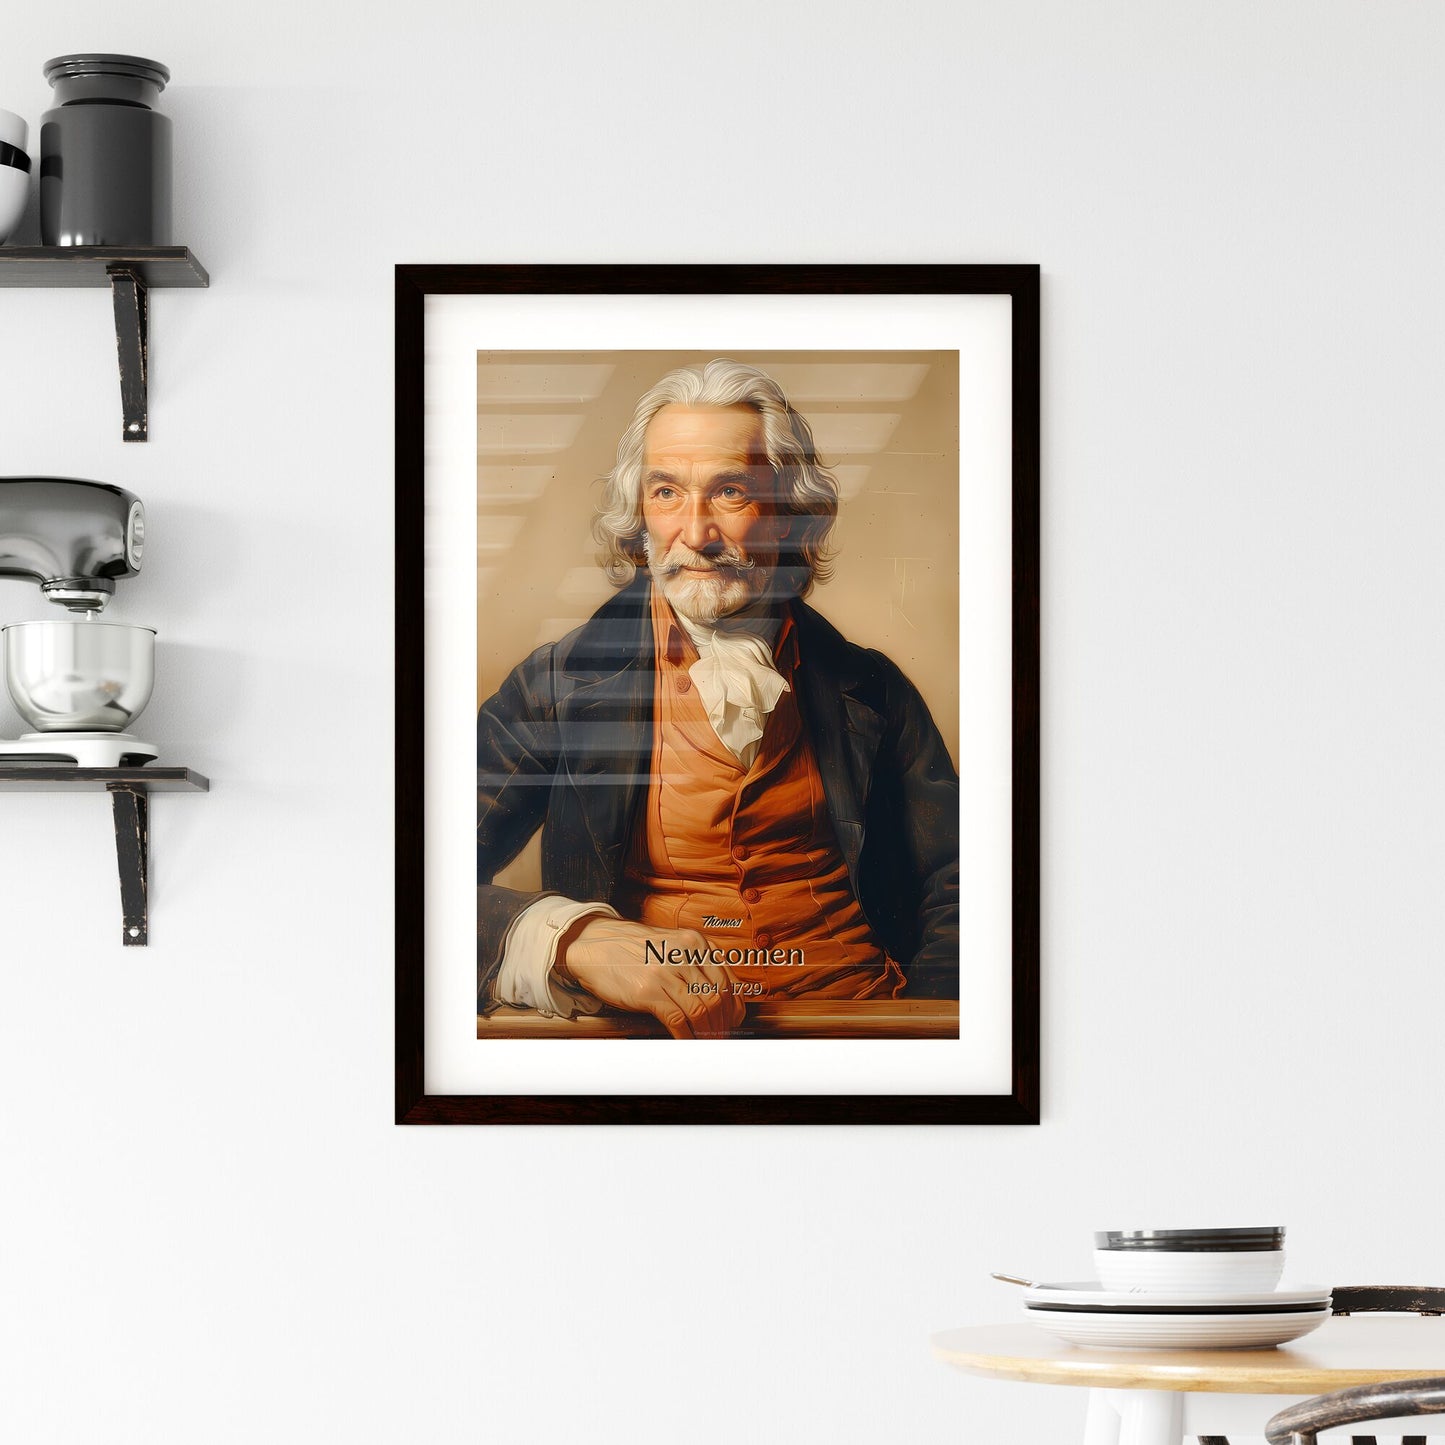 Thomas, Newcomen, 1664 - 1729, A Poster of a man with white hair and beard sitting in a chair Default Title